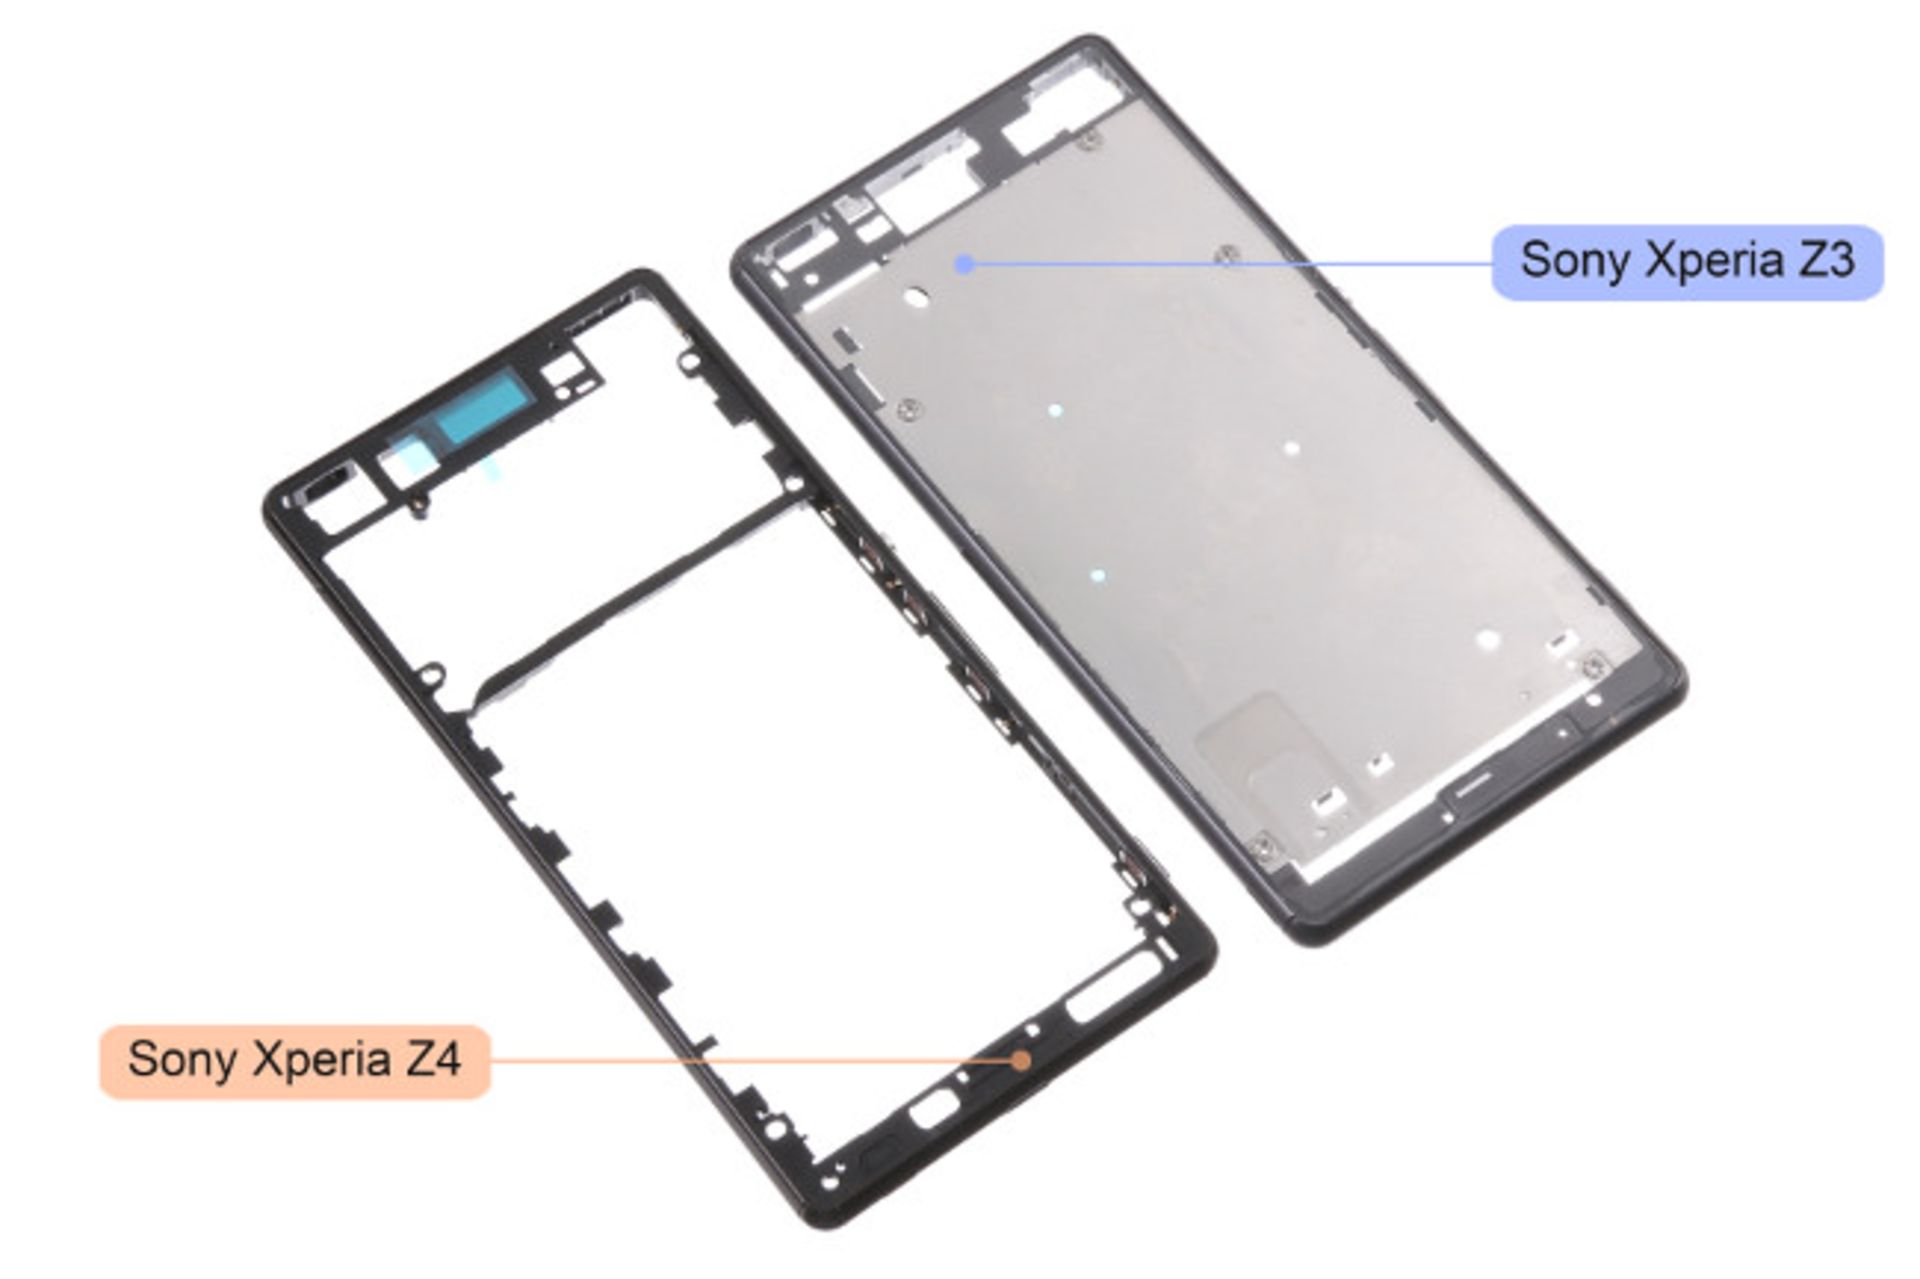 Leaked-Sony-Xperia-Z4-chassis-and-LCD-touch-digitizer 4